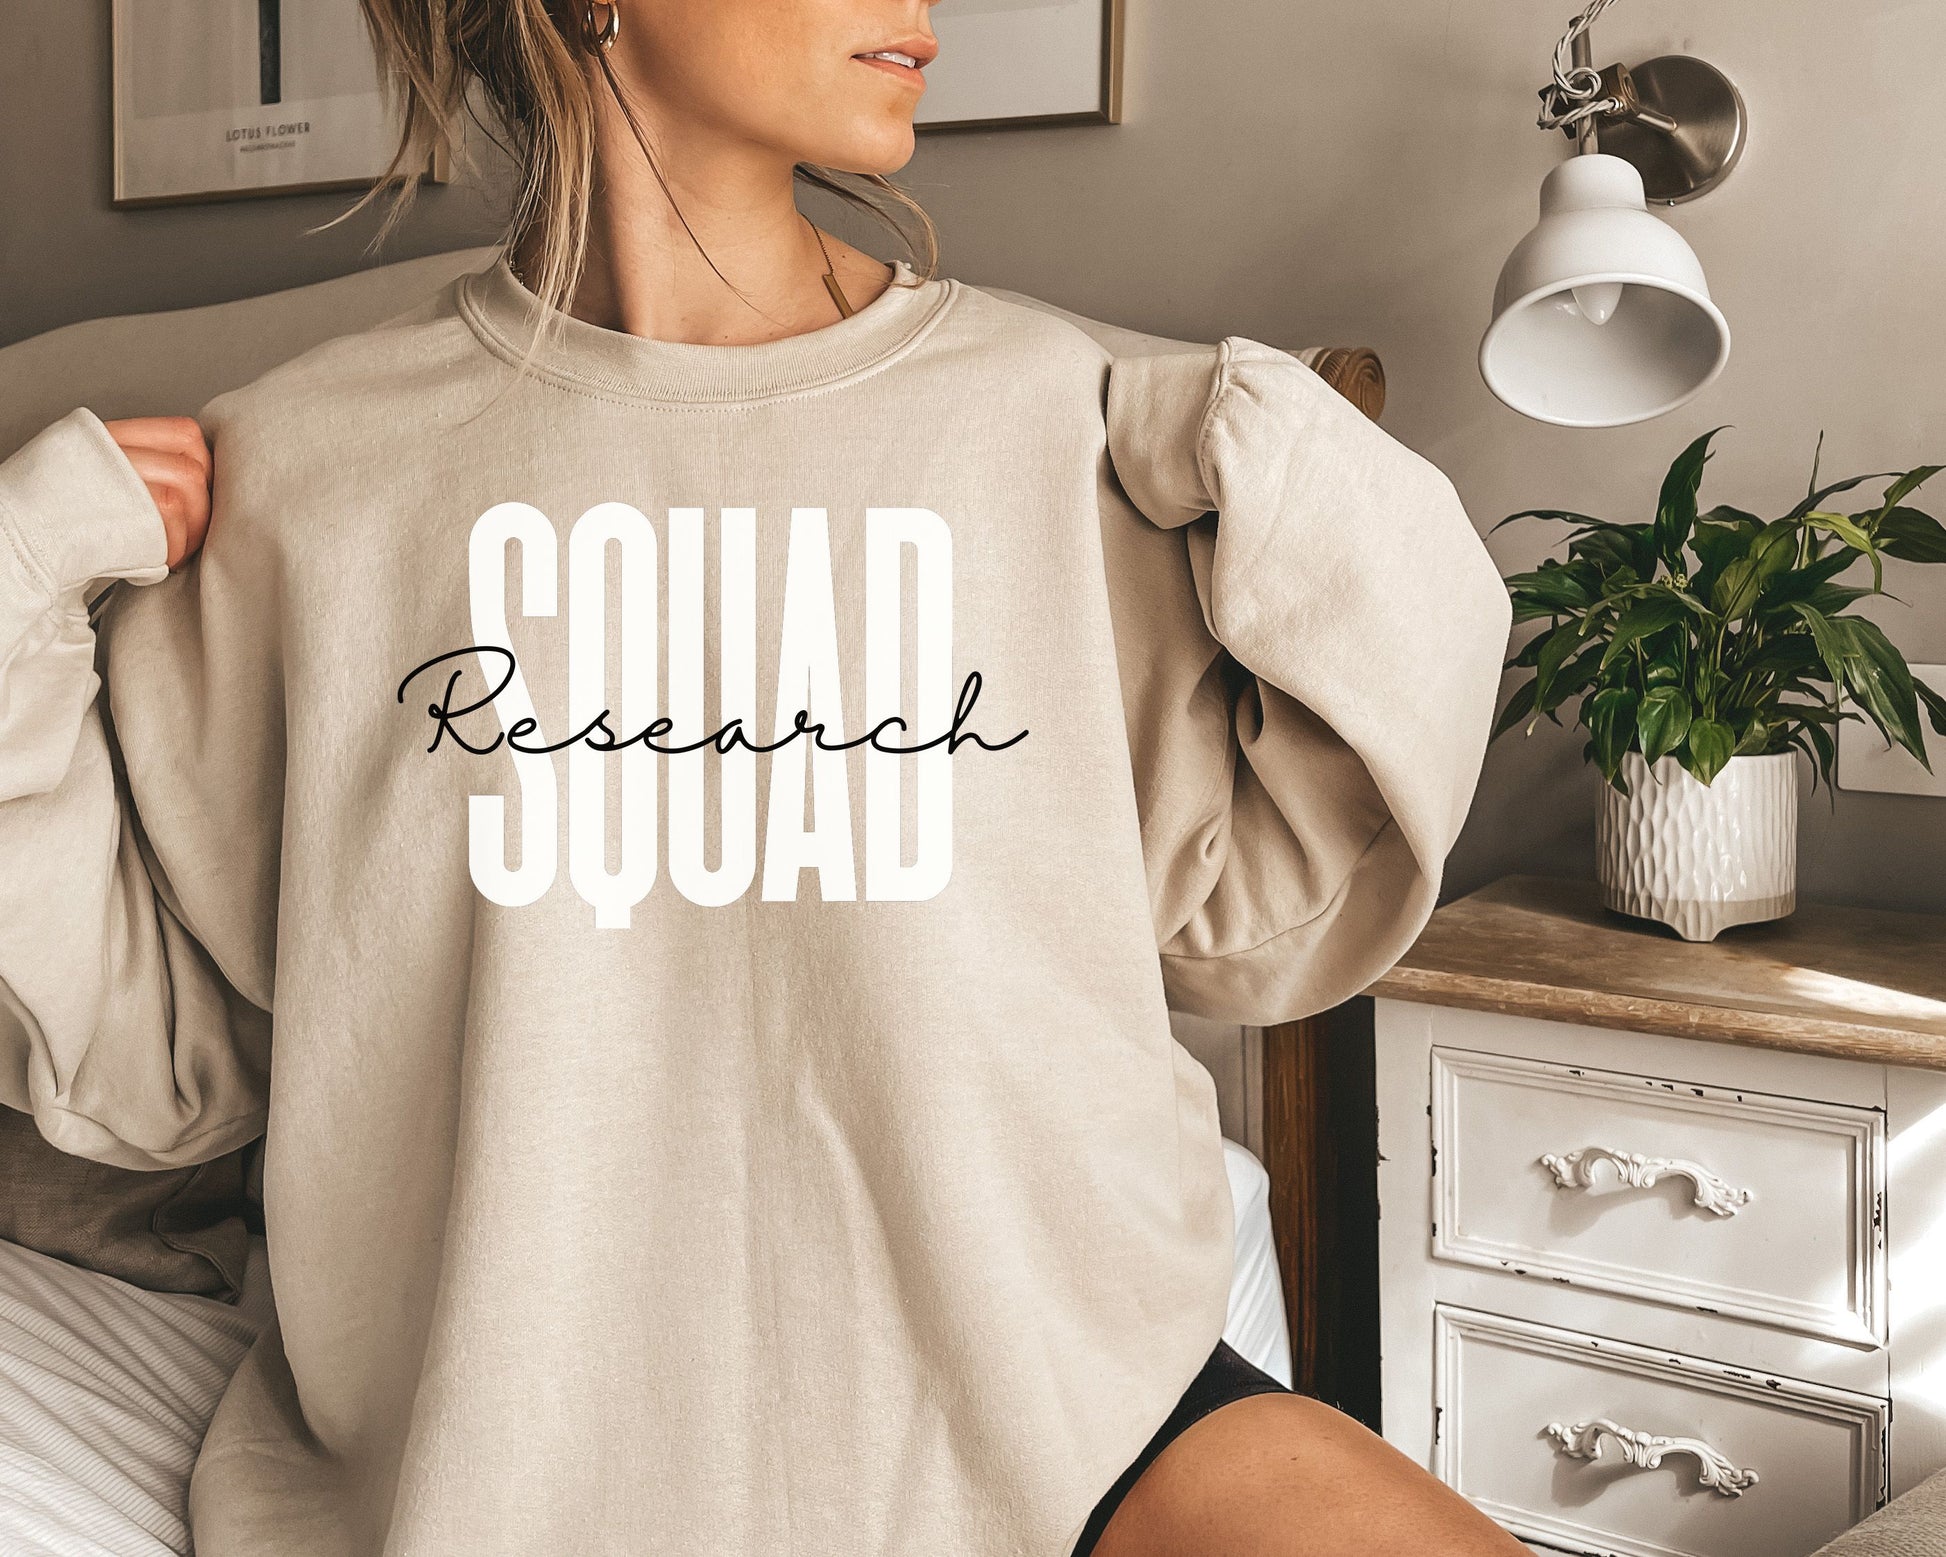 Research Squad Unisex Sweatshirt, Medical Research Crewneck Sand-Family-Gift-Planet